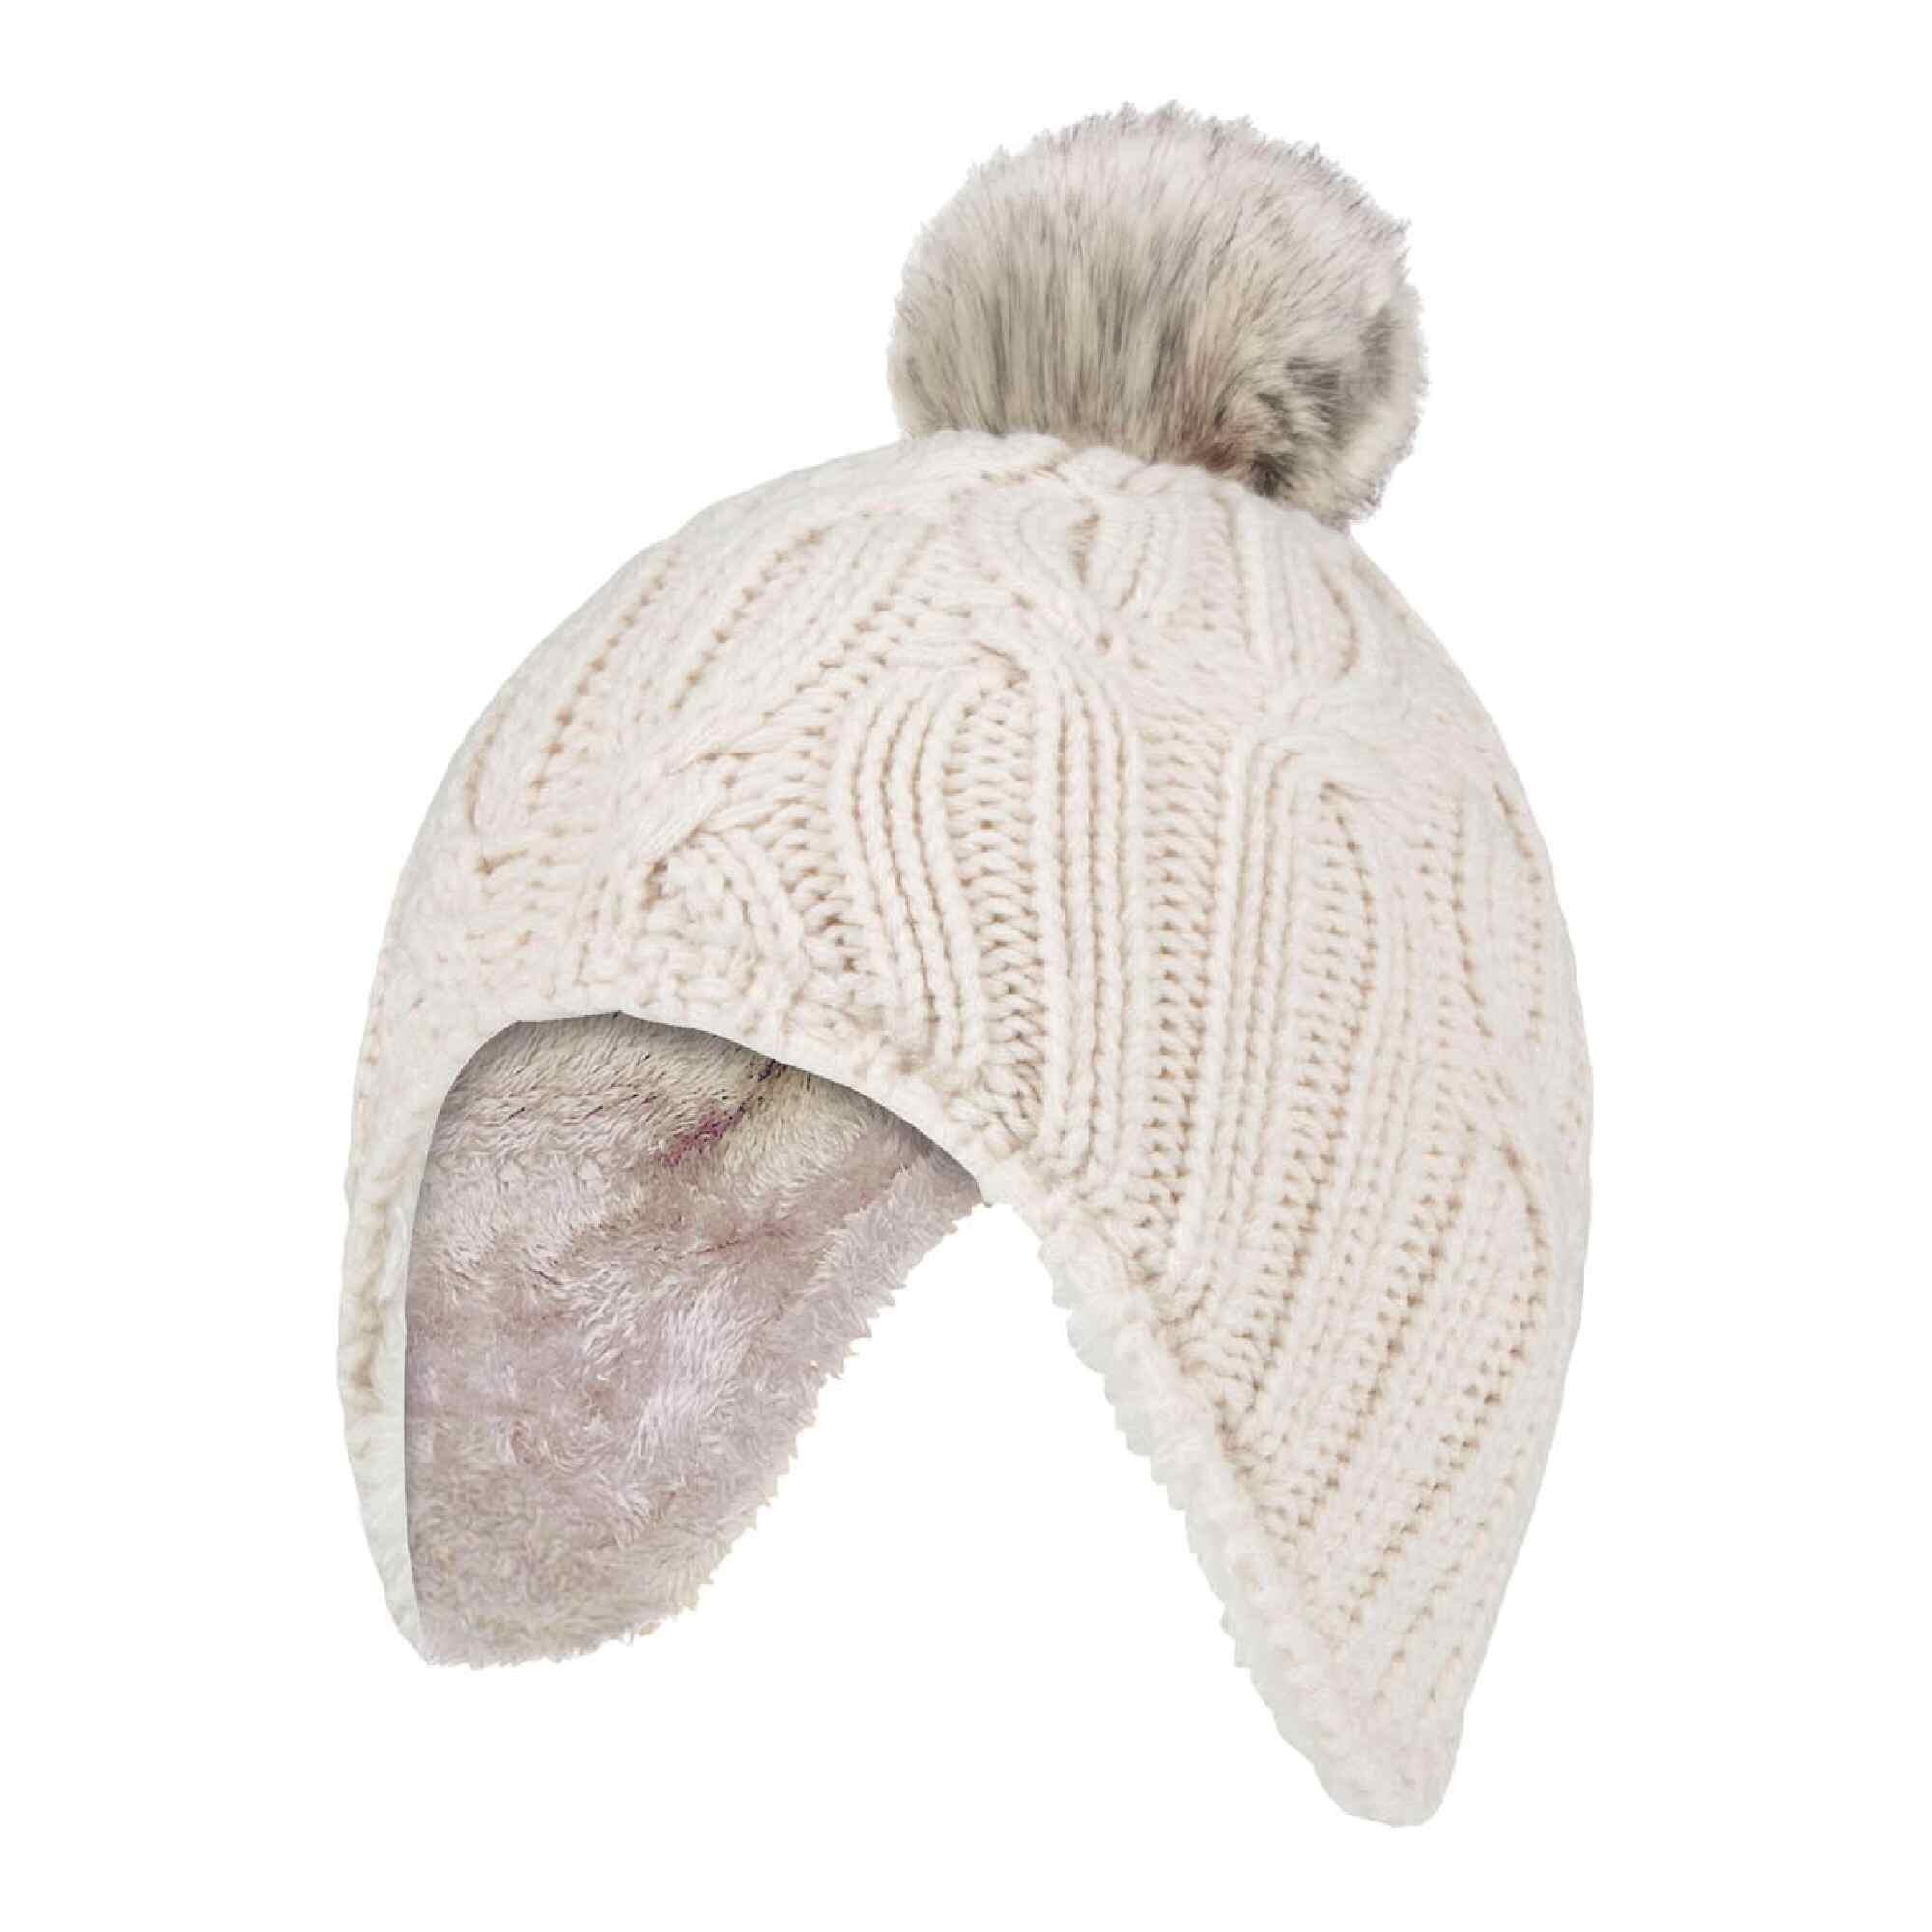 Girls Cable Knitted Beanie Hat with Pom Pom Bobble for Winter 1/3